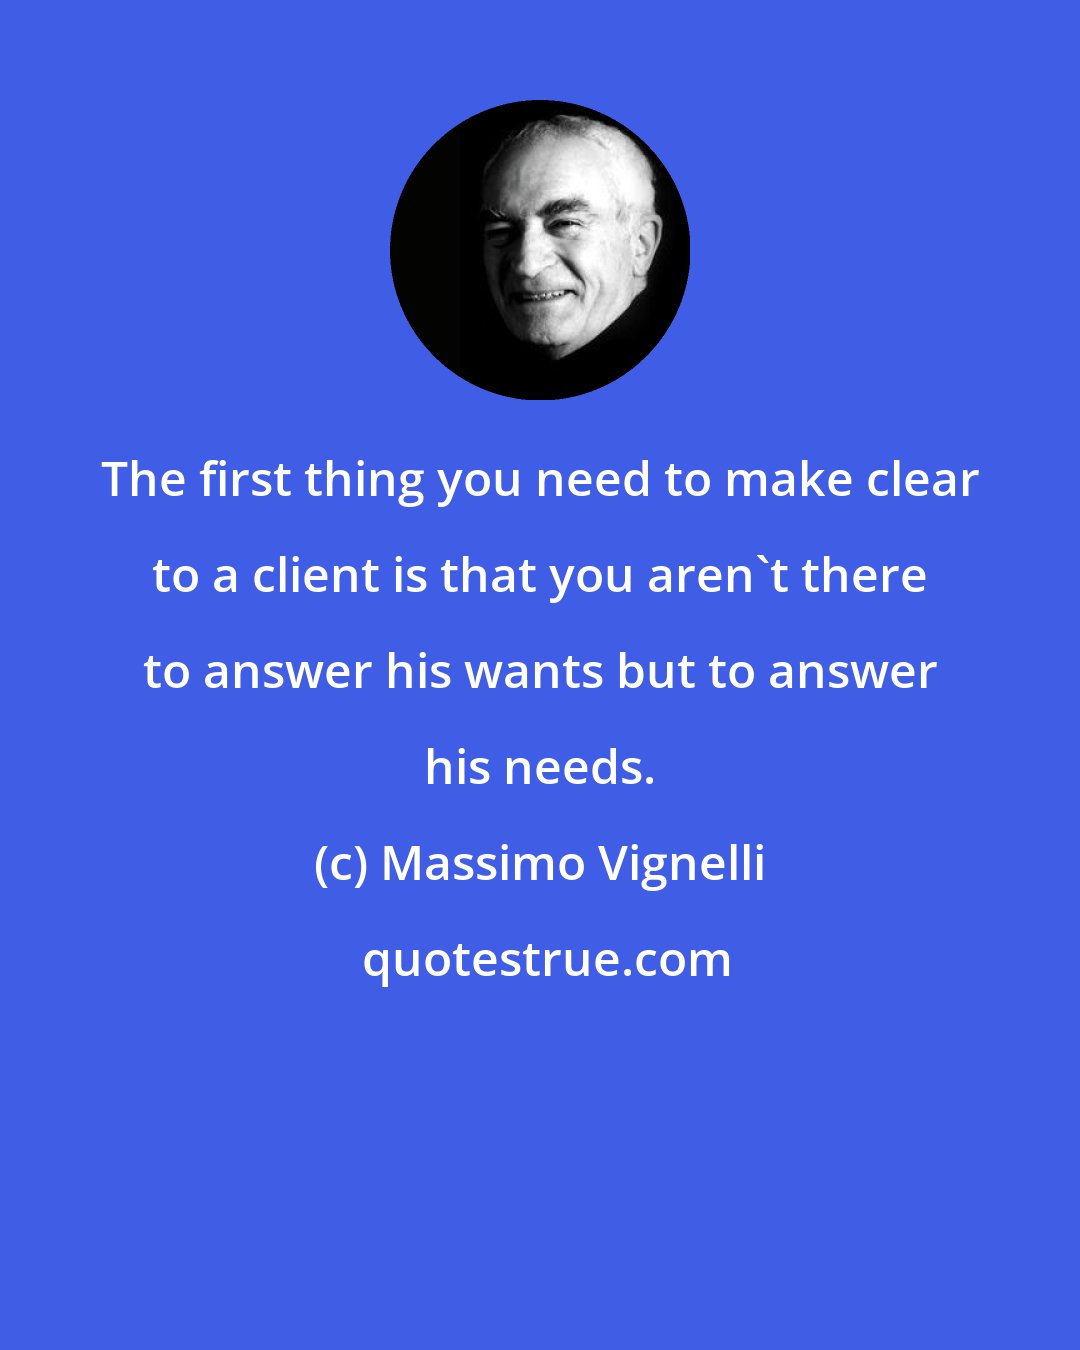 Massimo Vignelli: The first thing you need to make clear to a client is that you aren't there to answer his wants but to answer his needs.